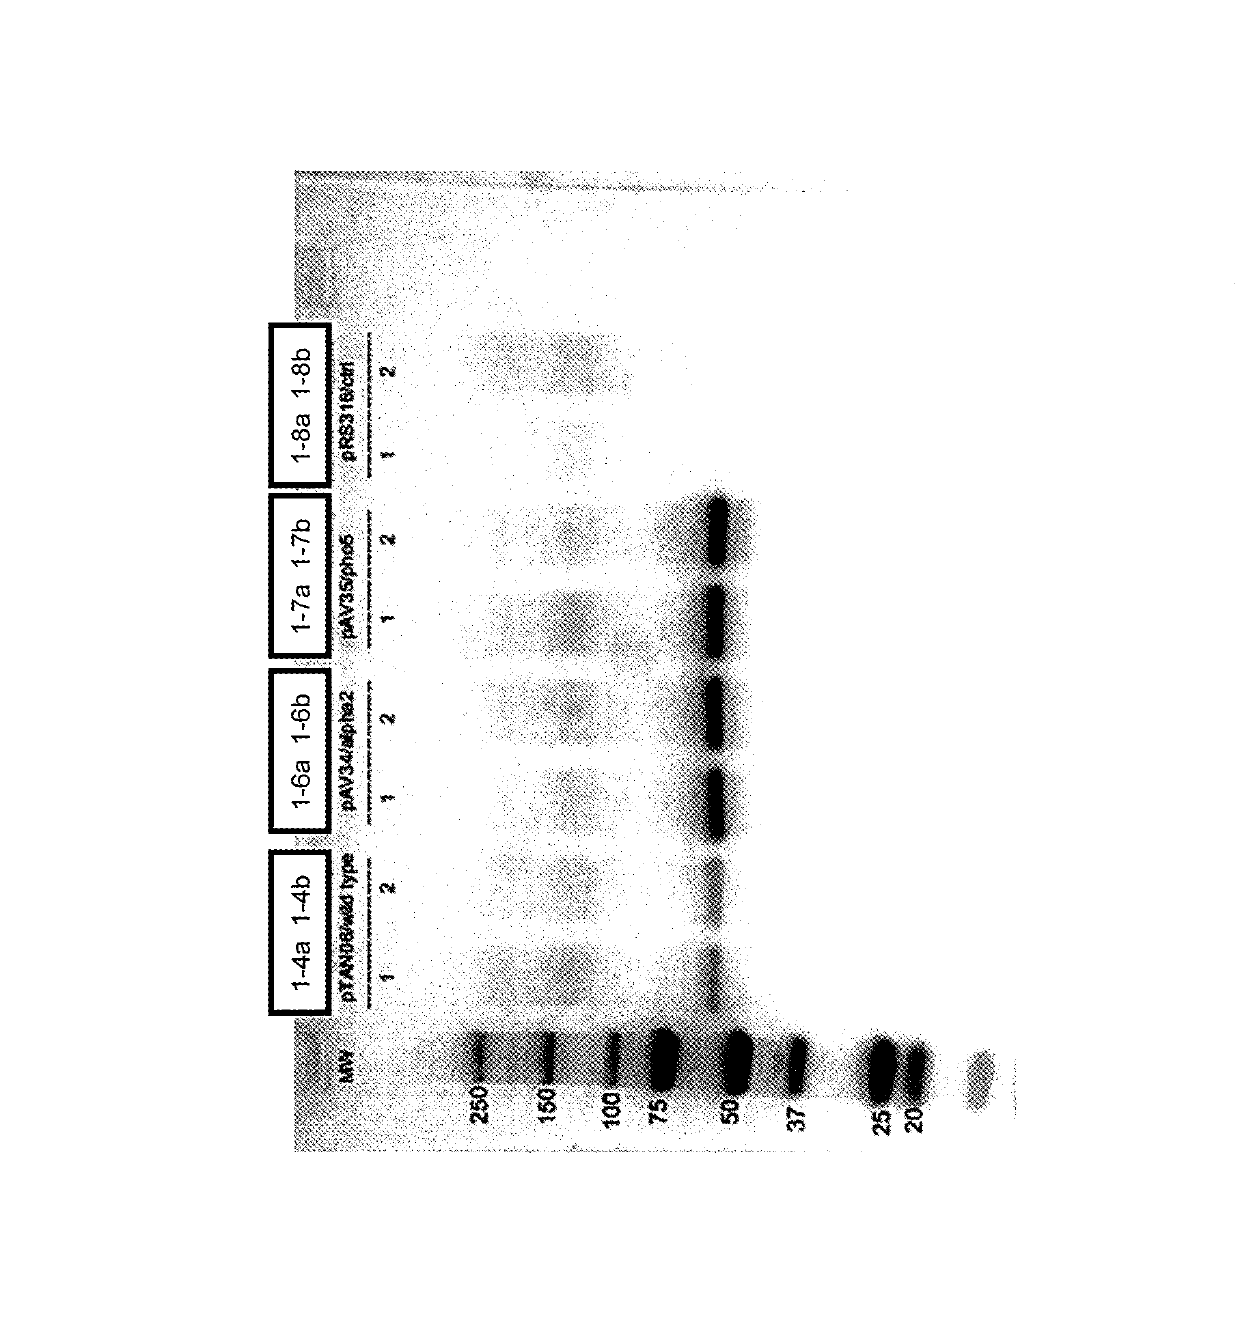 Modified glucoamylase enzymes and yeast strains having enhanced bioproduct production